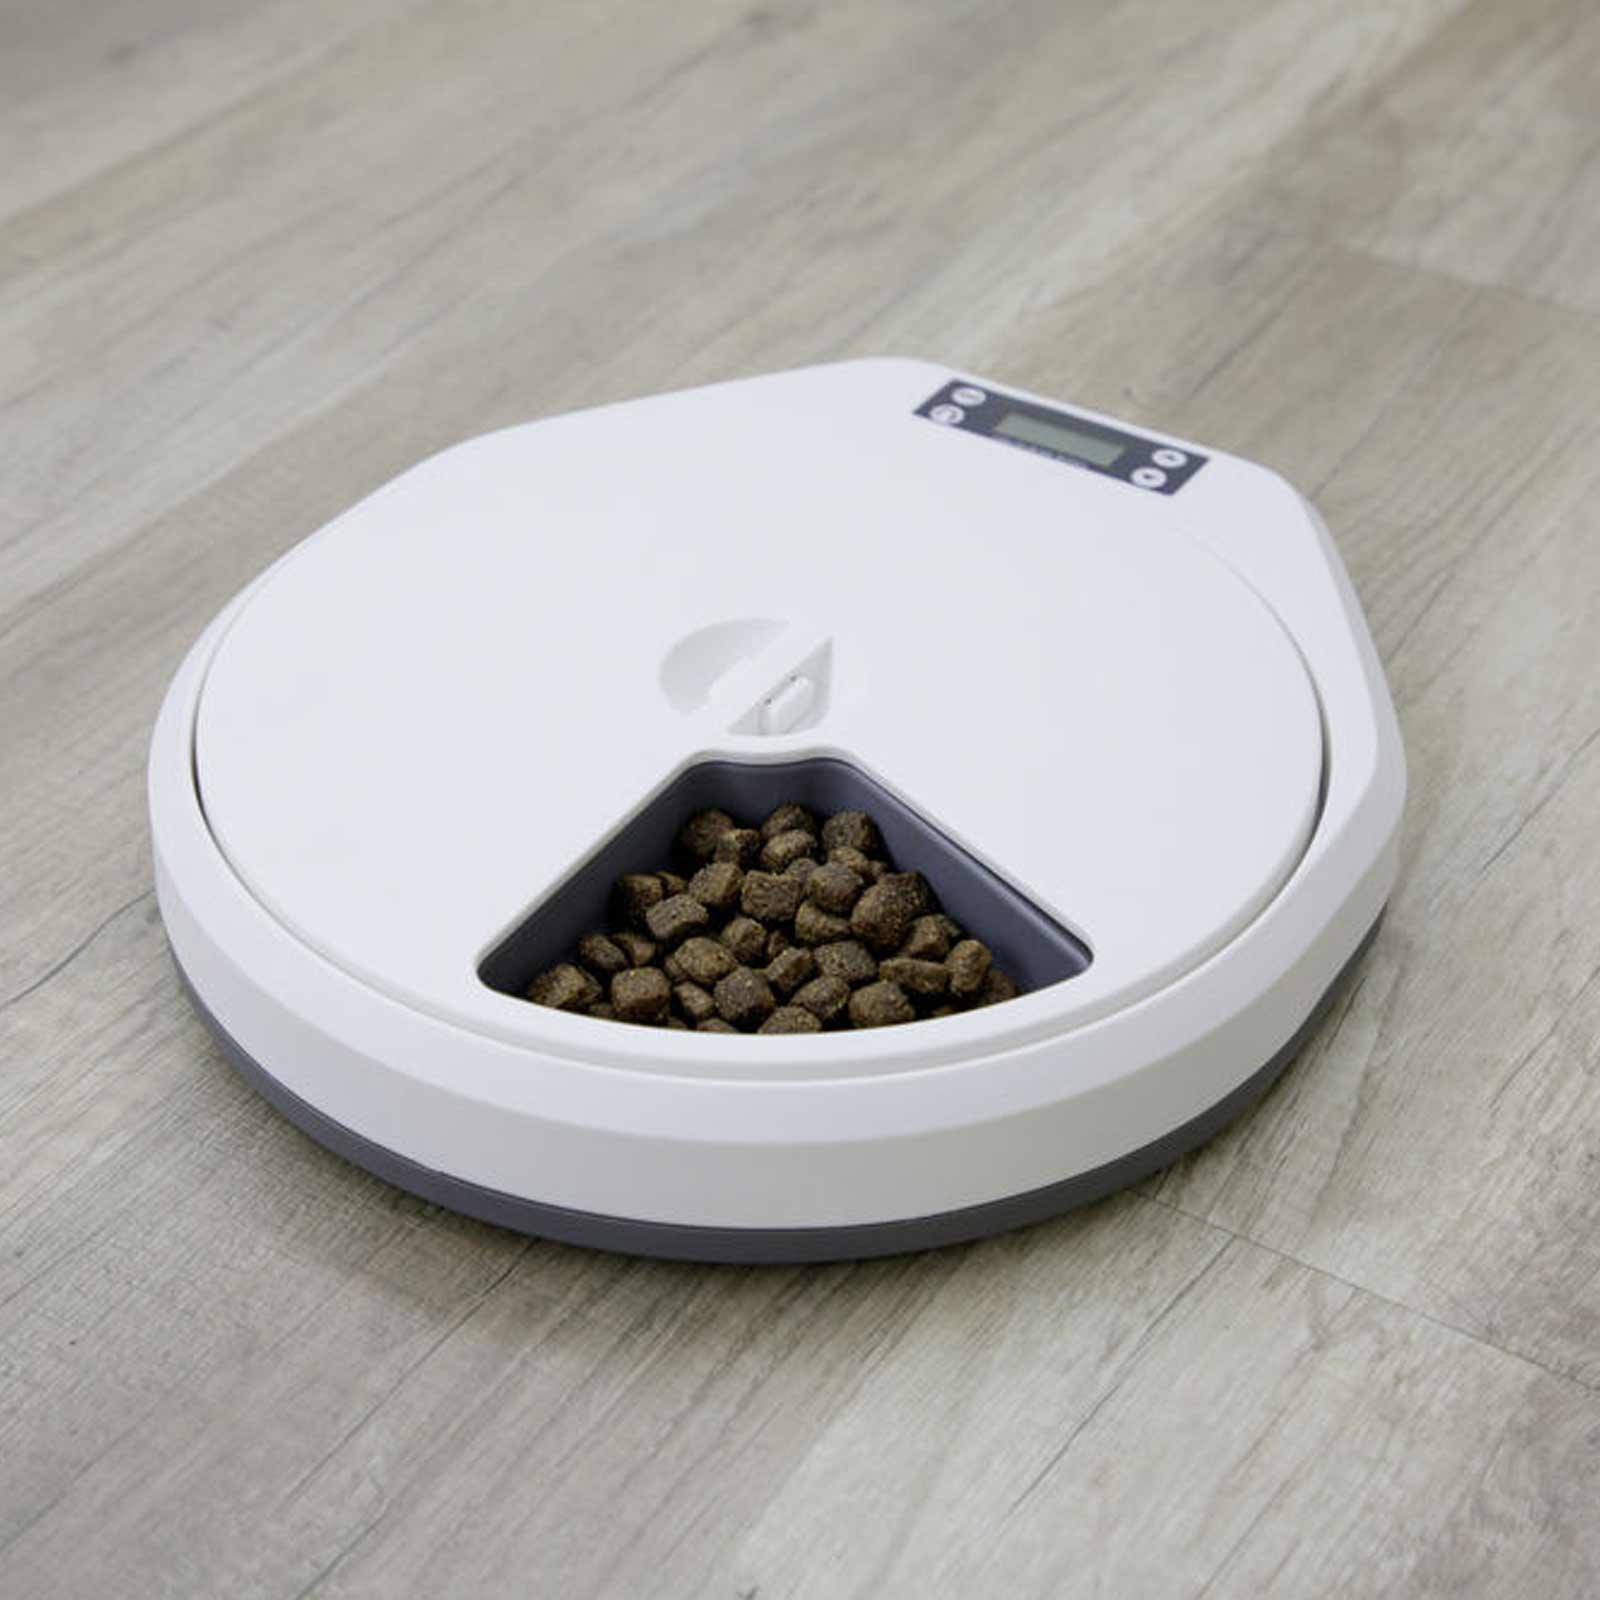 Automatic feeder for 5 meals